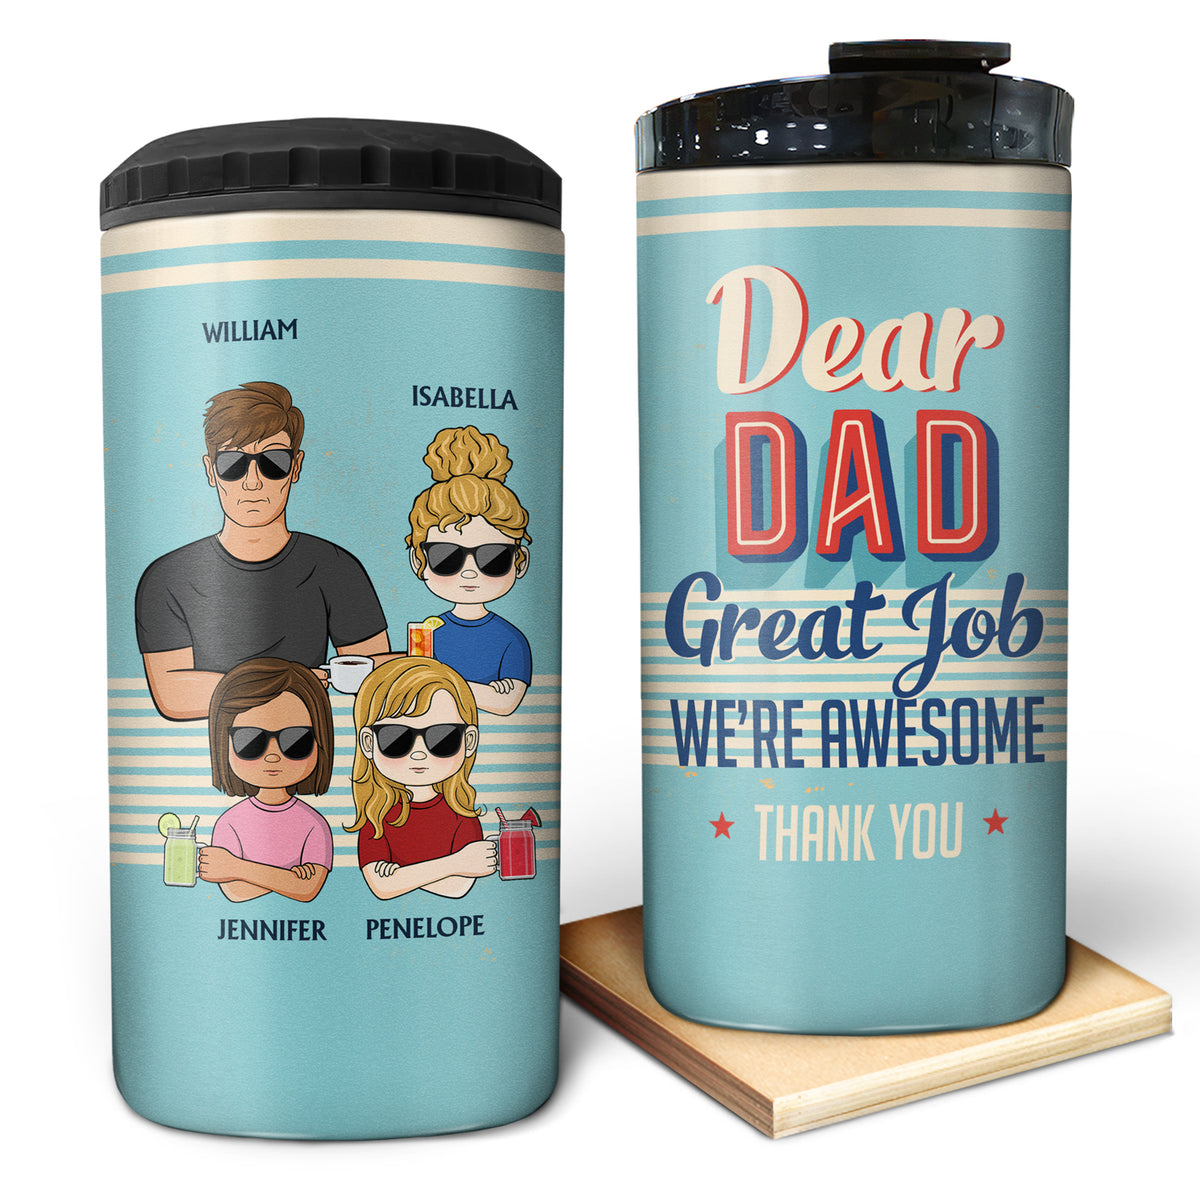 Yeti Rambler a great Father's Day gift idea